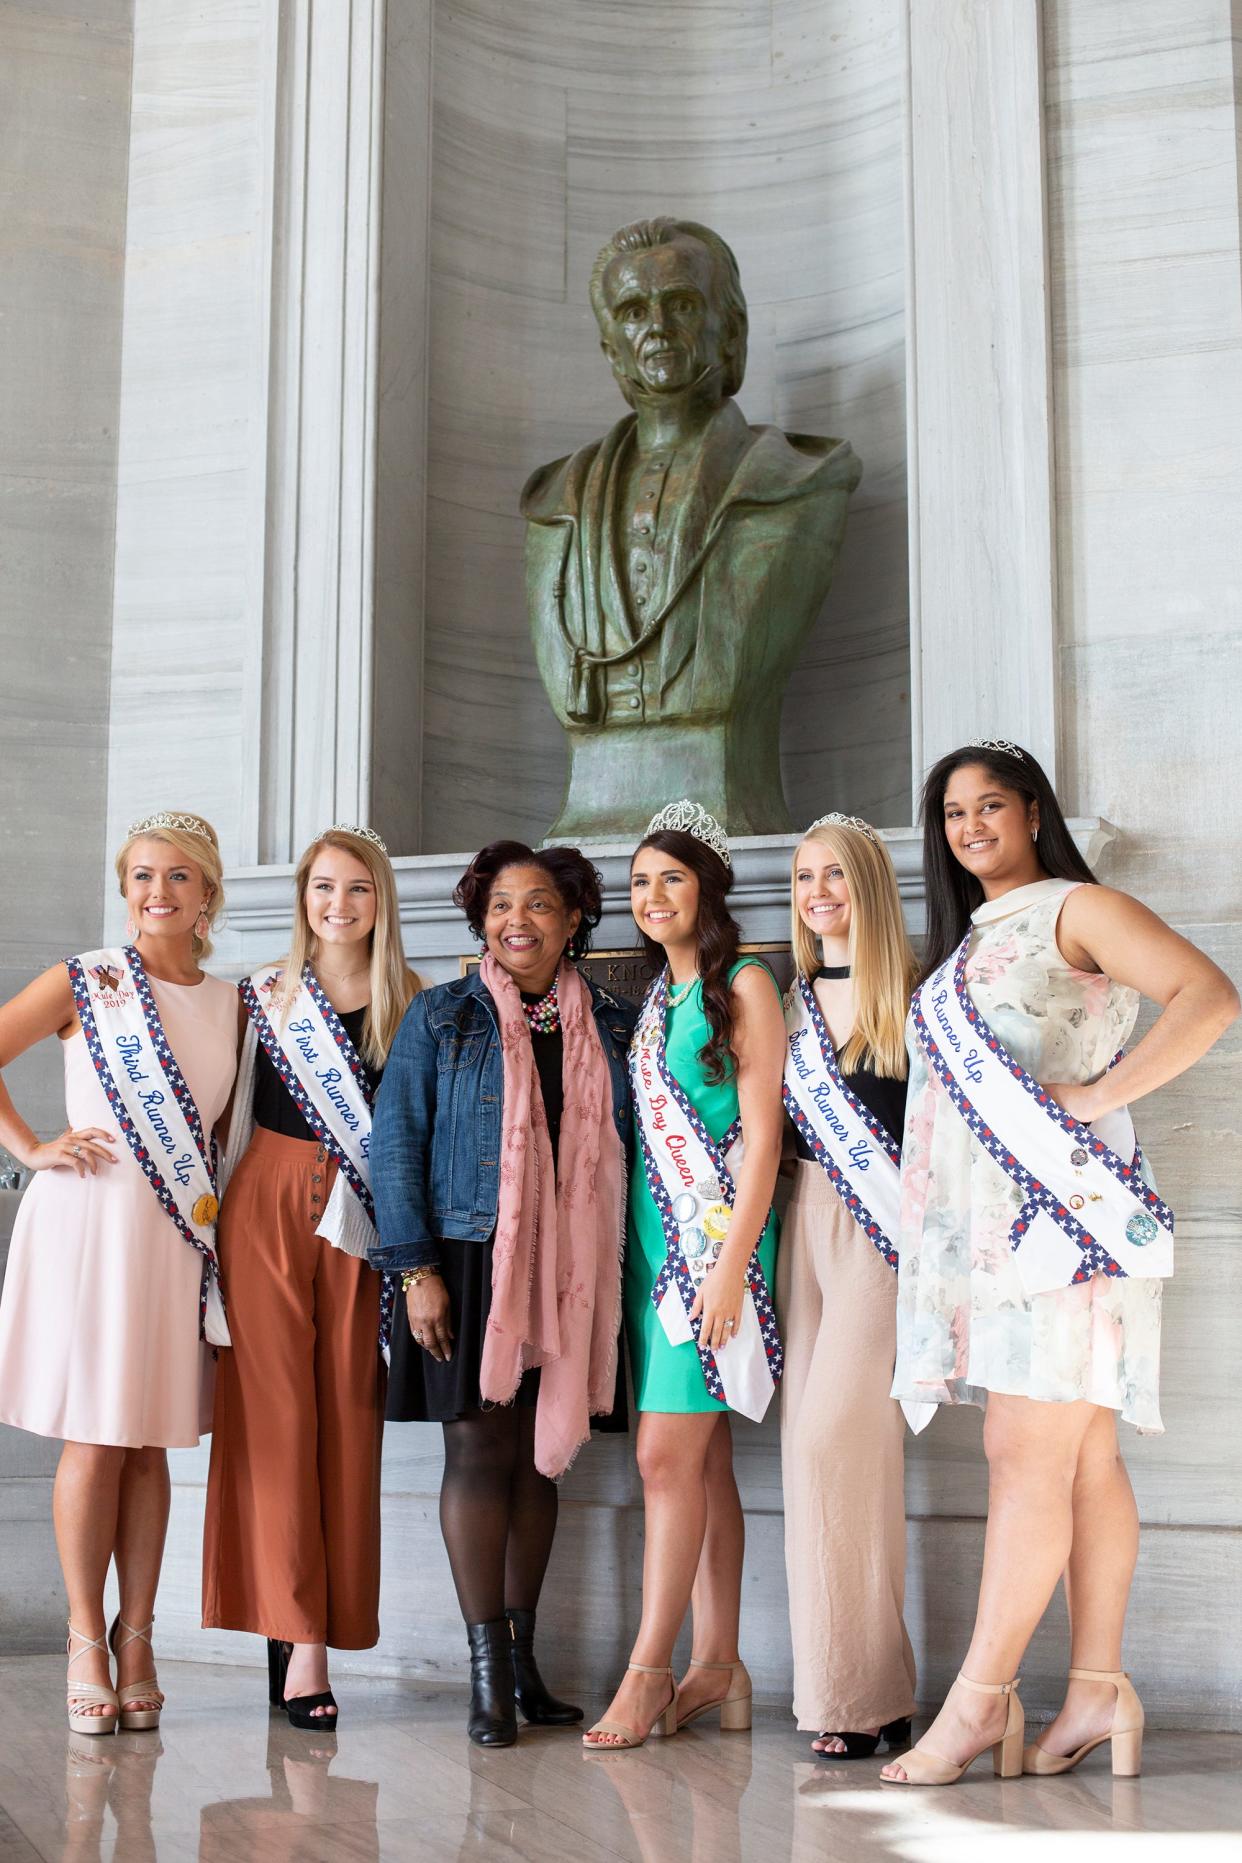 Columbia Vice Mayor Christa Martin joins Mule Day queen Alayna Keeling and court members Hallie Marshall, 17;  Haley James, 18; Kayla Gibson, 18; and Graciee English, 16 in front of a bust of President James K. Polk at the Capitol Monday, April 1, 2019.